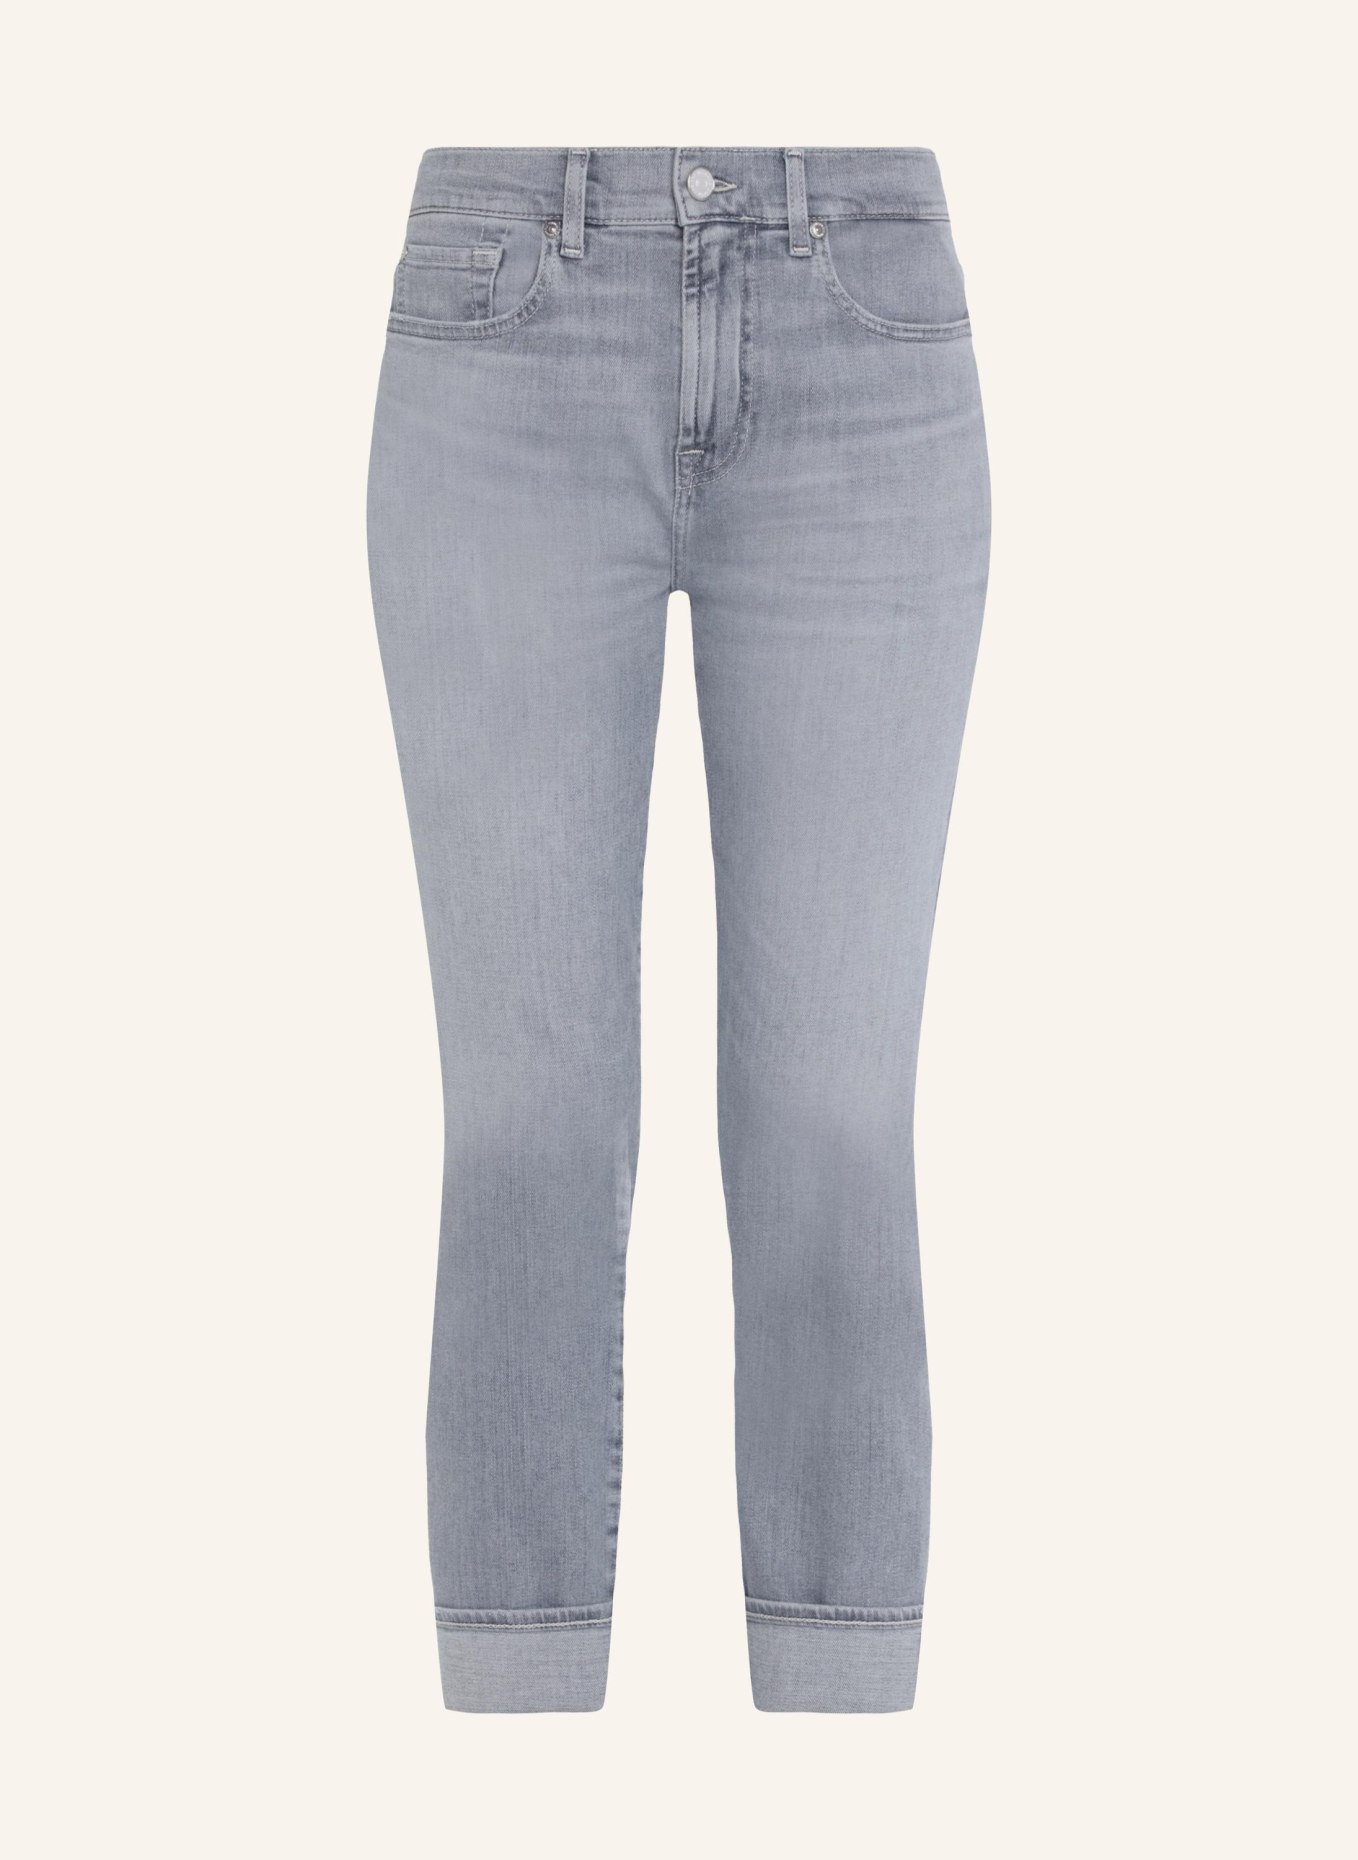 7 for all mankind Jeans RELAXED SKINNY Skinny fit, Farbe: GRAU (Bild 1)